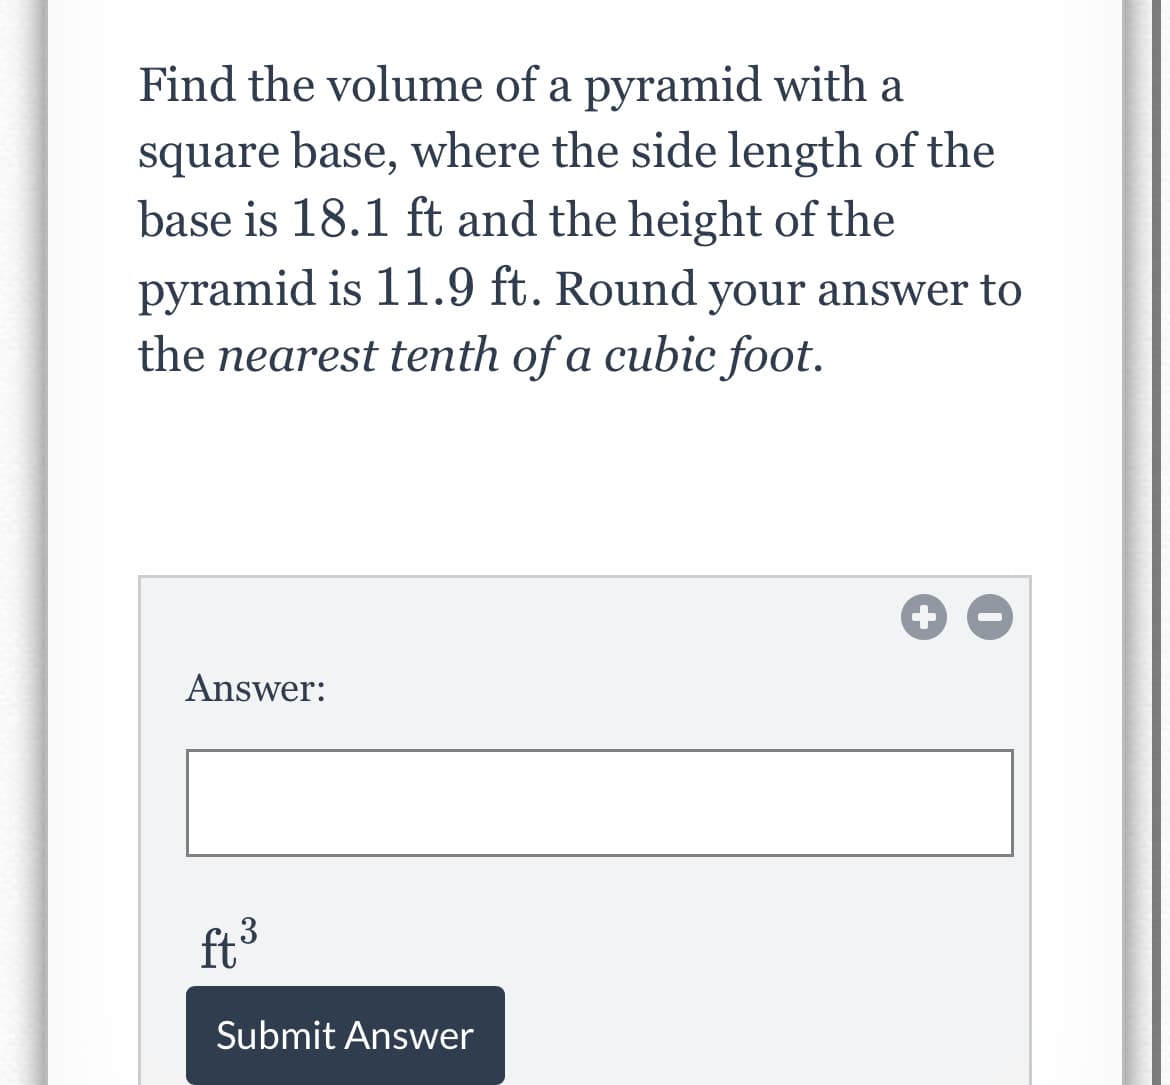 Find the volume of a pyramid with a
square base, where the side length of the
base is 18.1 ft and the height of the
pyramid is 11.9 ft. Round your answer to
the nearest tenth of a cubic foot.
Answer:
3
ft
Submit Answer
